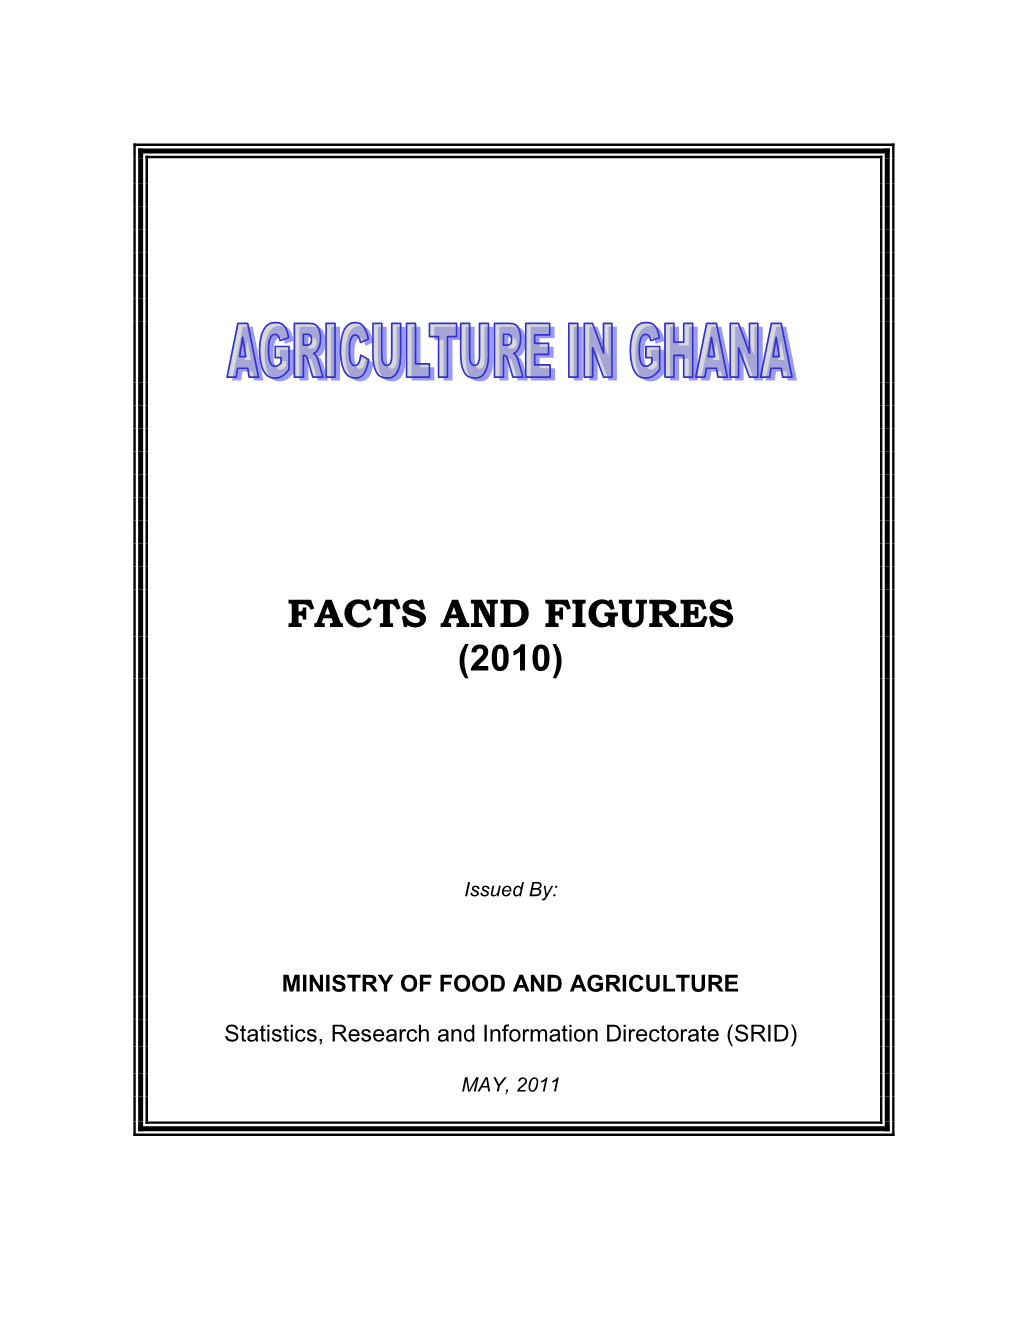 Agriculture in Ghana : Facts and Figures